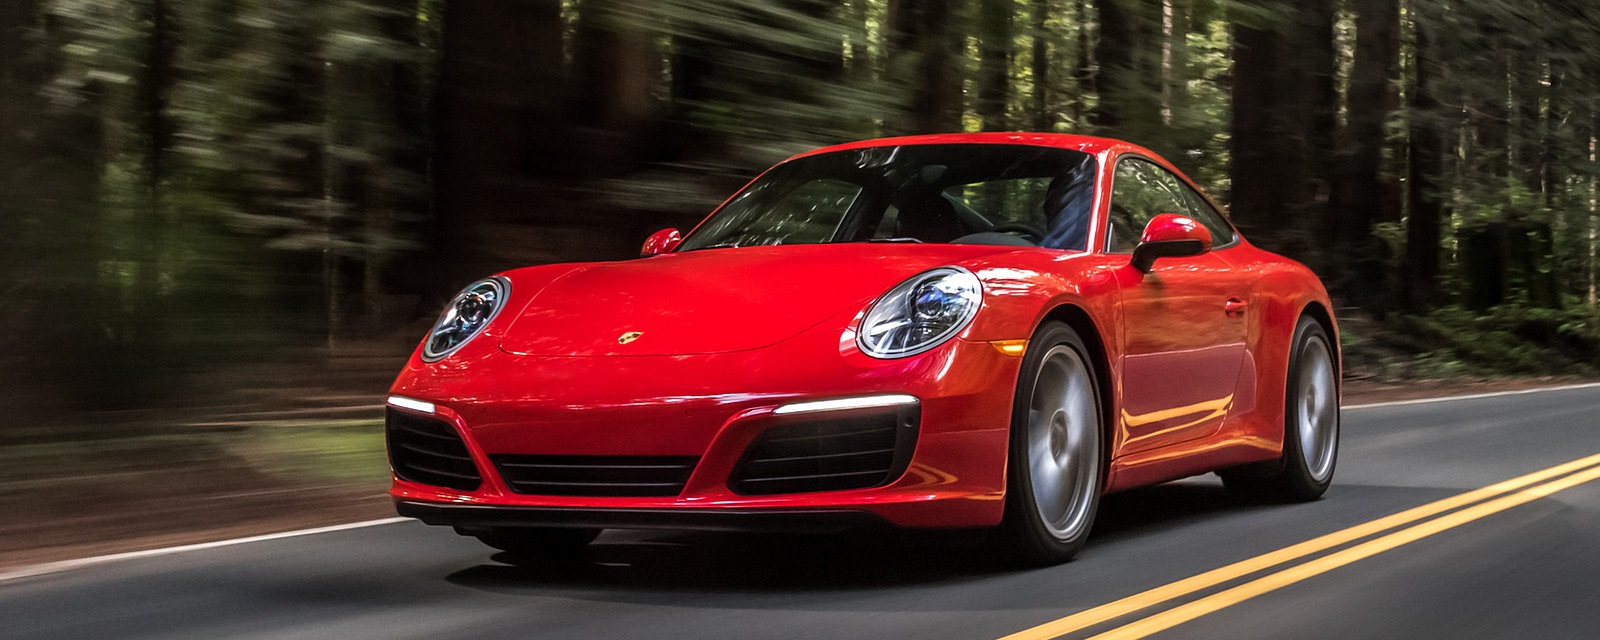 Everything you need to know about the Porsche car connect system